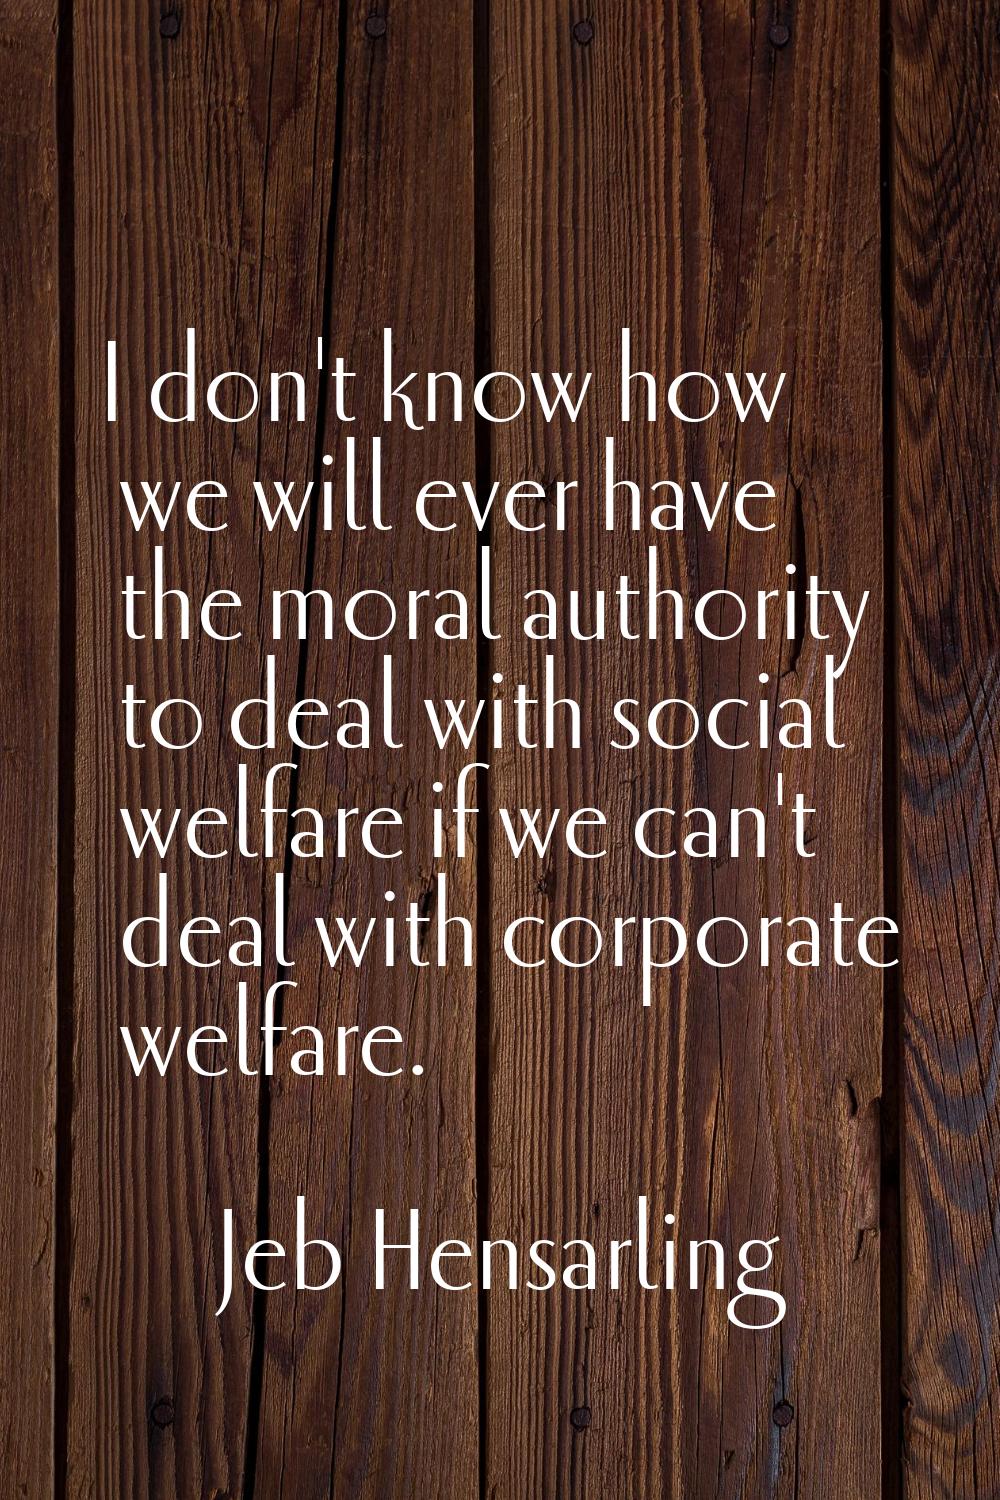 I don't know how we will ever have the moral authority to deal with social welfare if we can't deal